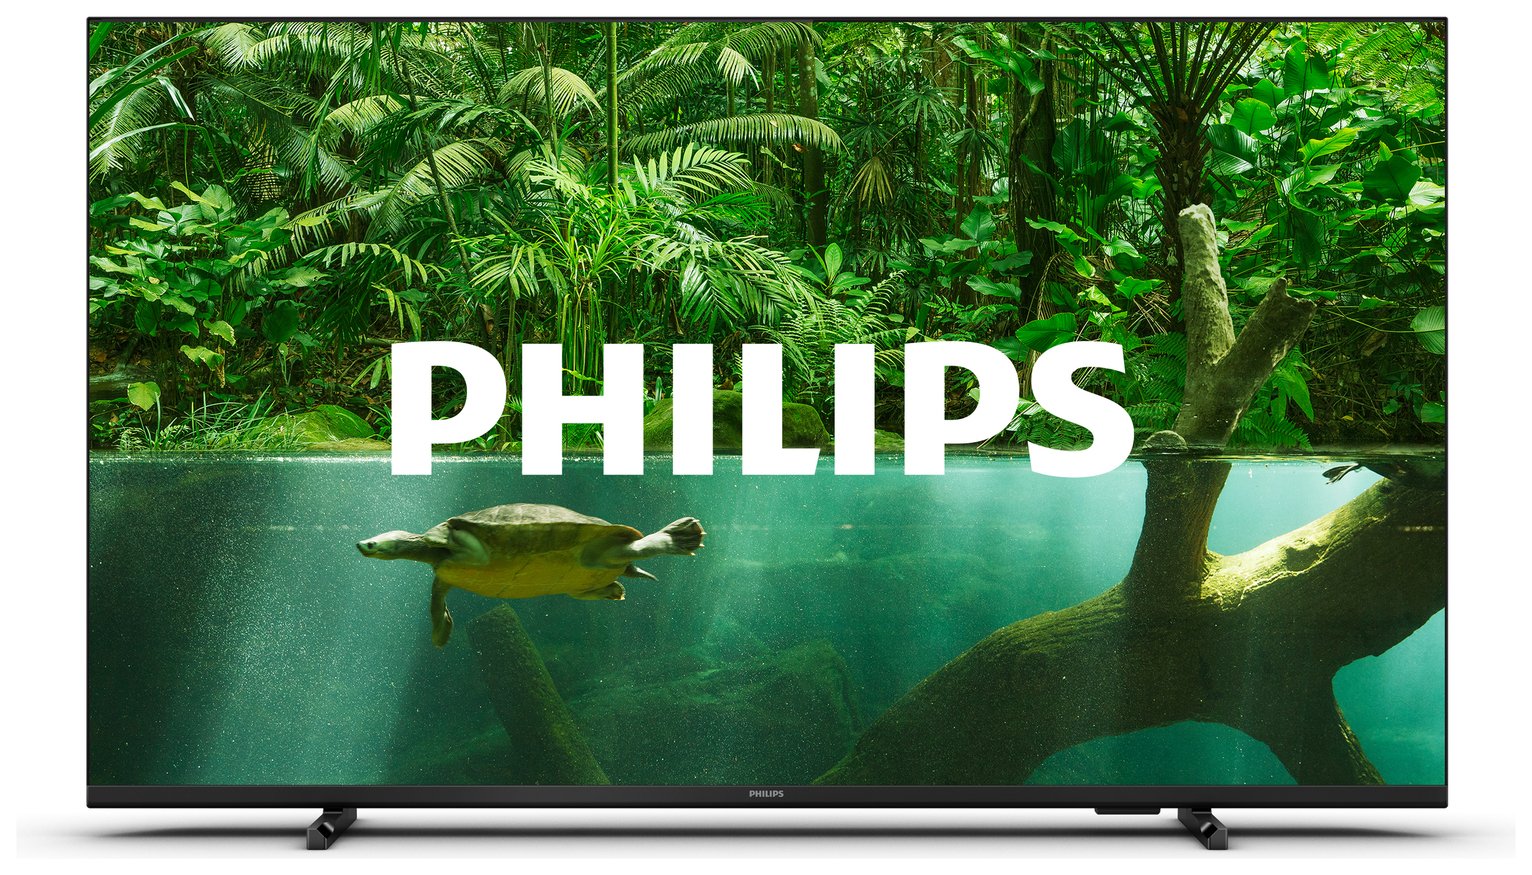 Philips 55 Inch 55PUS7008 Smart 4K UHD HDR LED Freeview TV